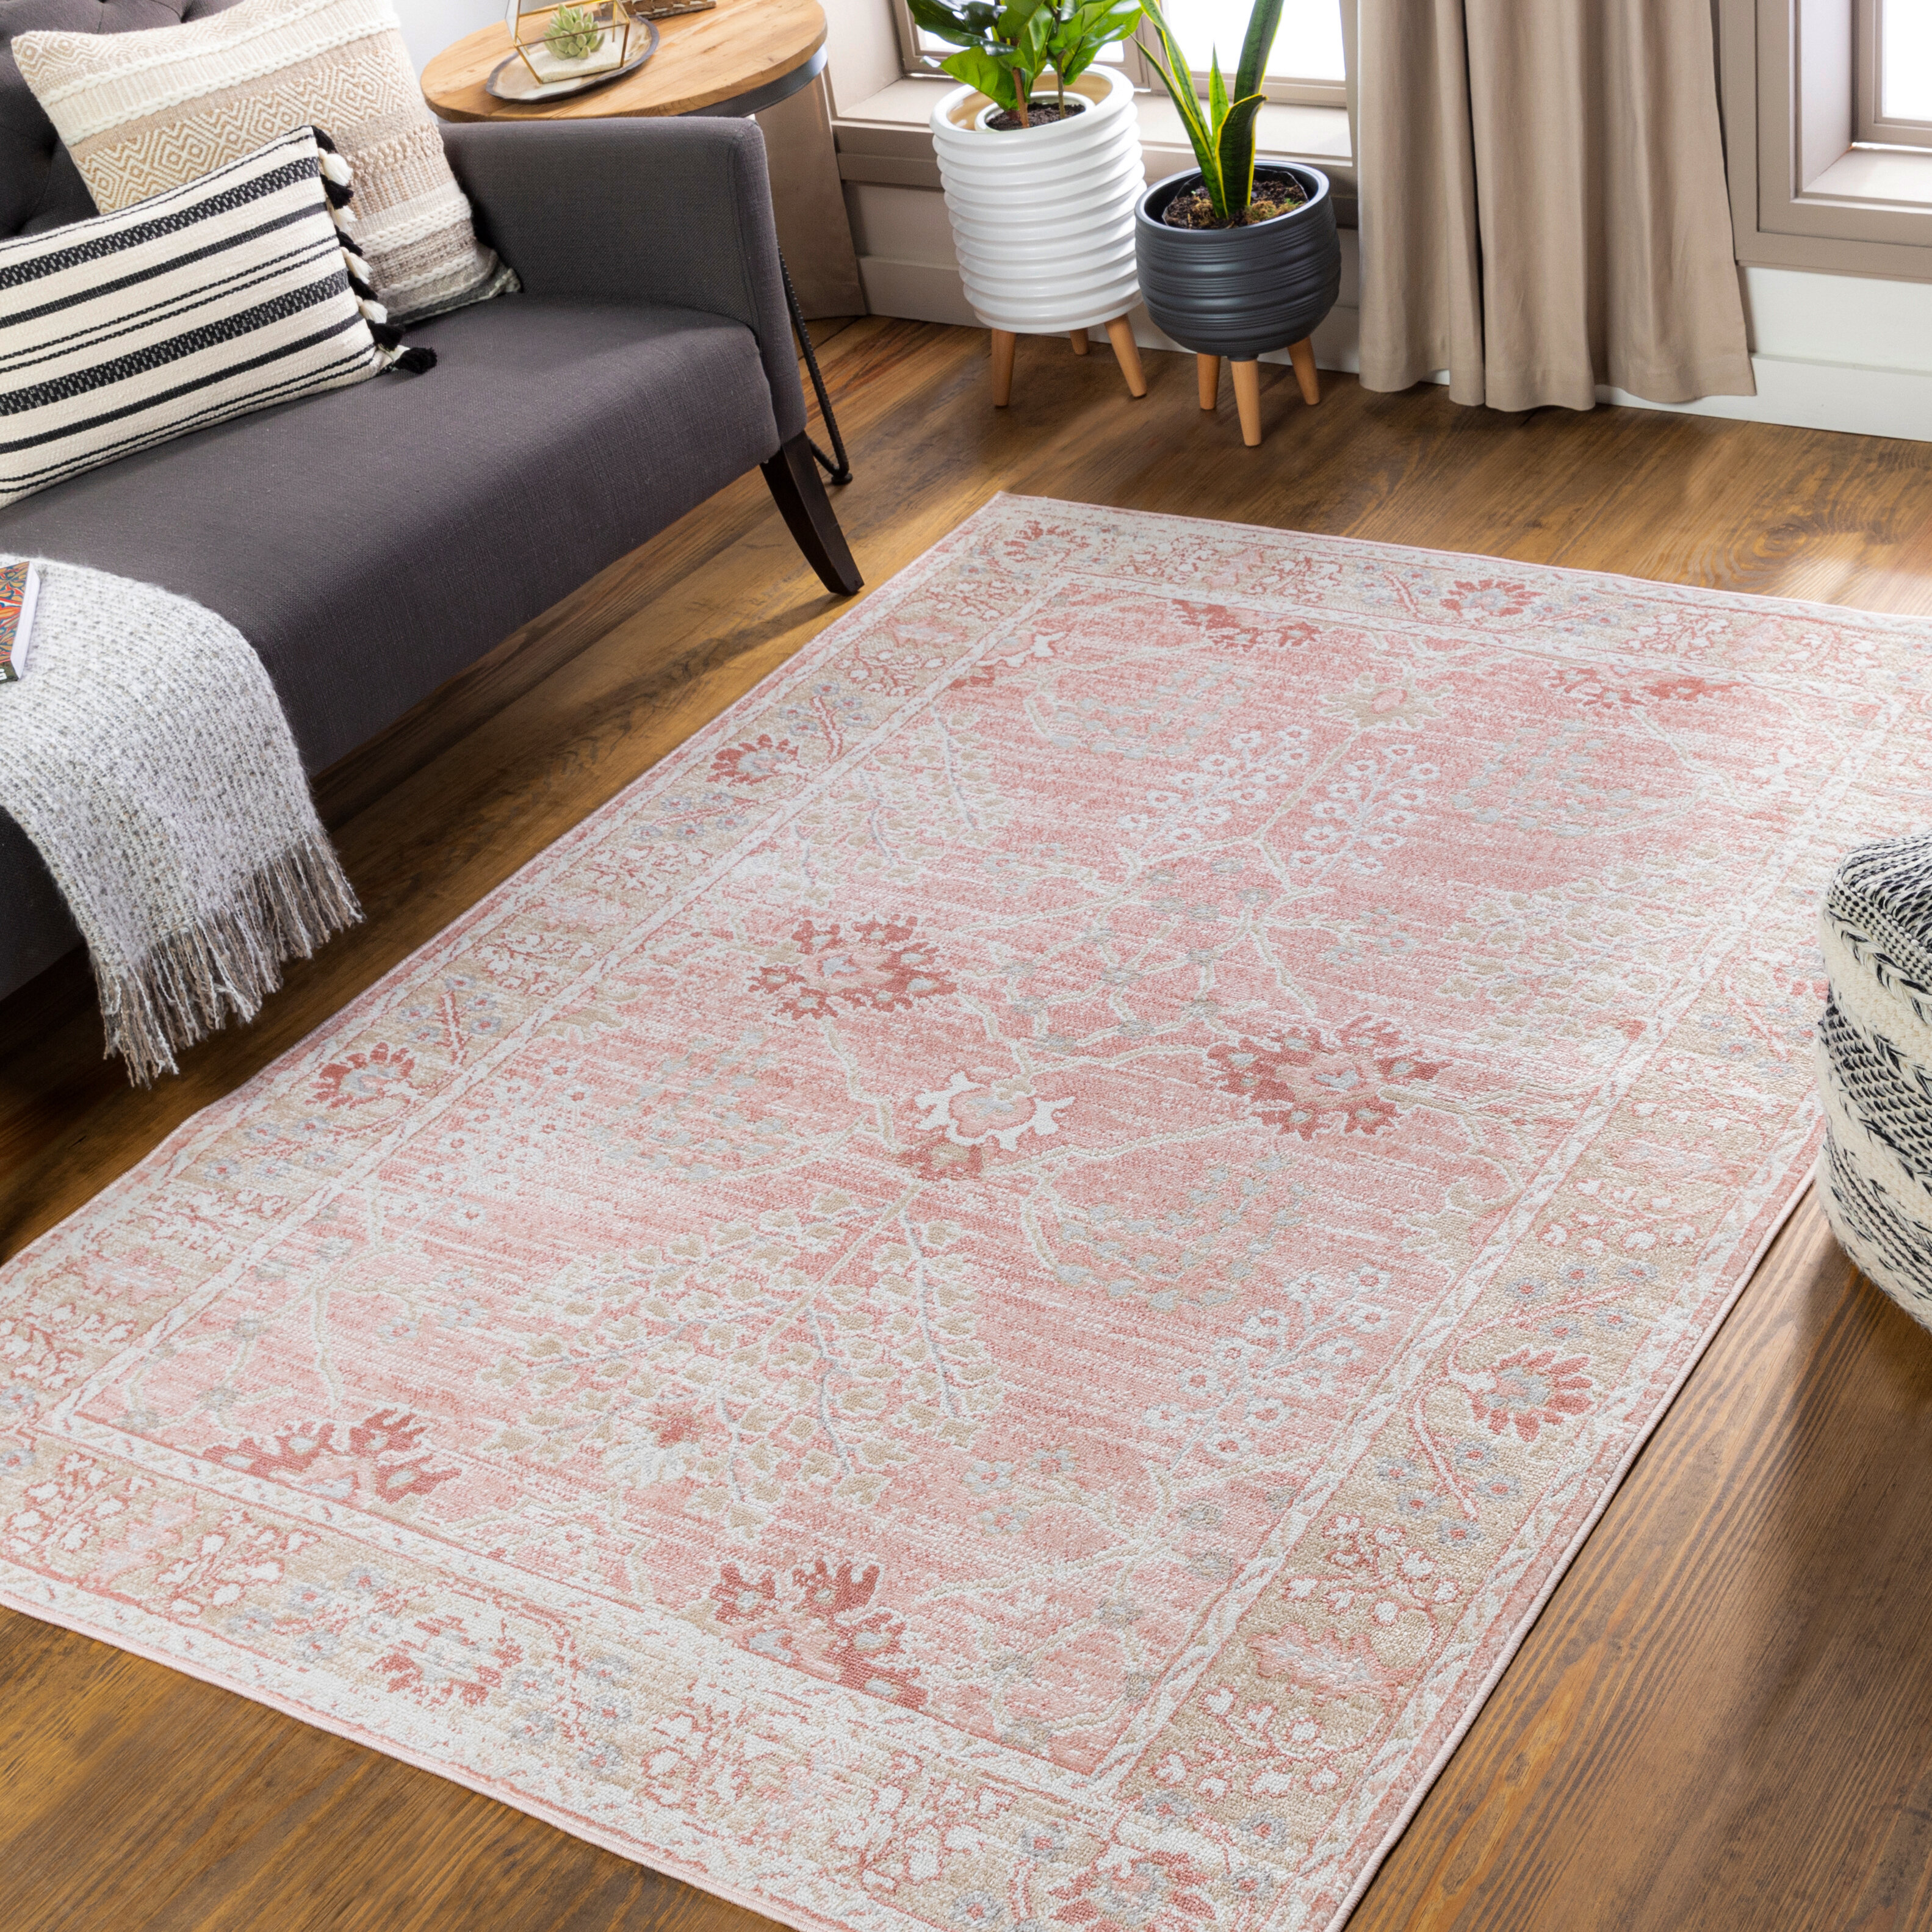 Centerville Oriental Pink Area Rug Langley Street Rug Size: Rectangle 7'9 x 9'6